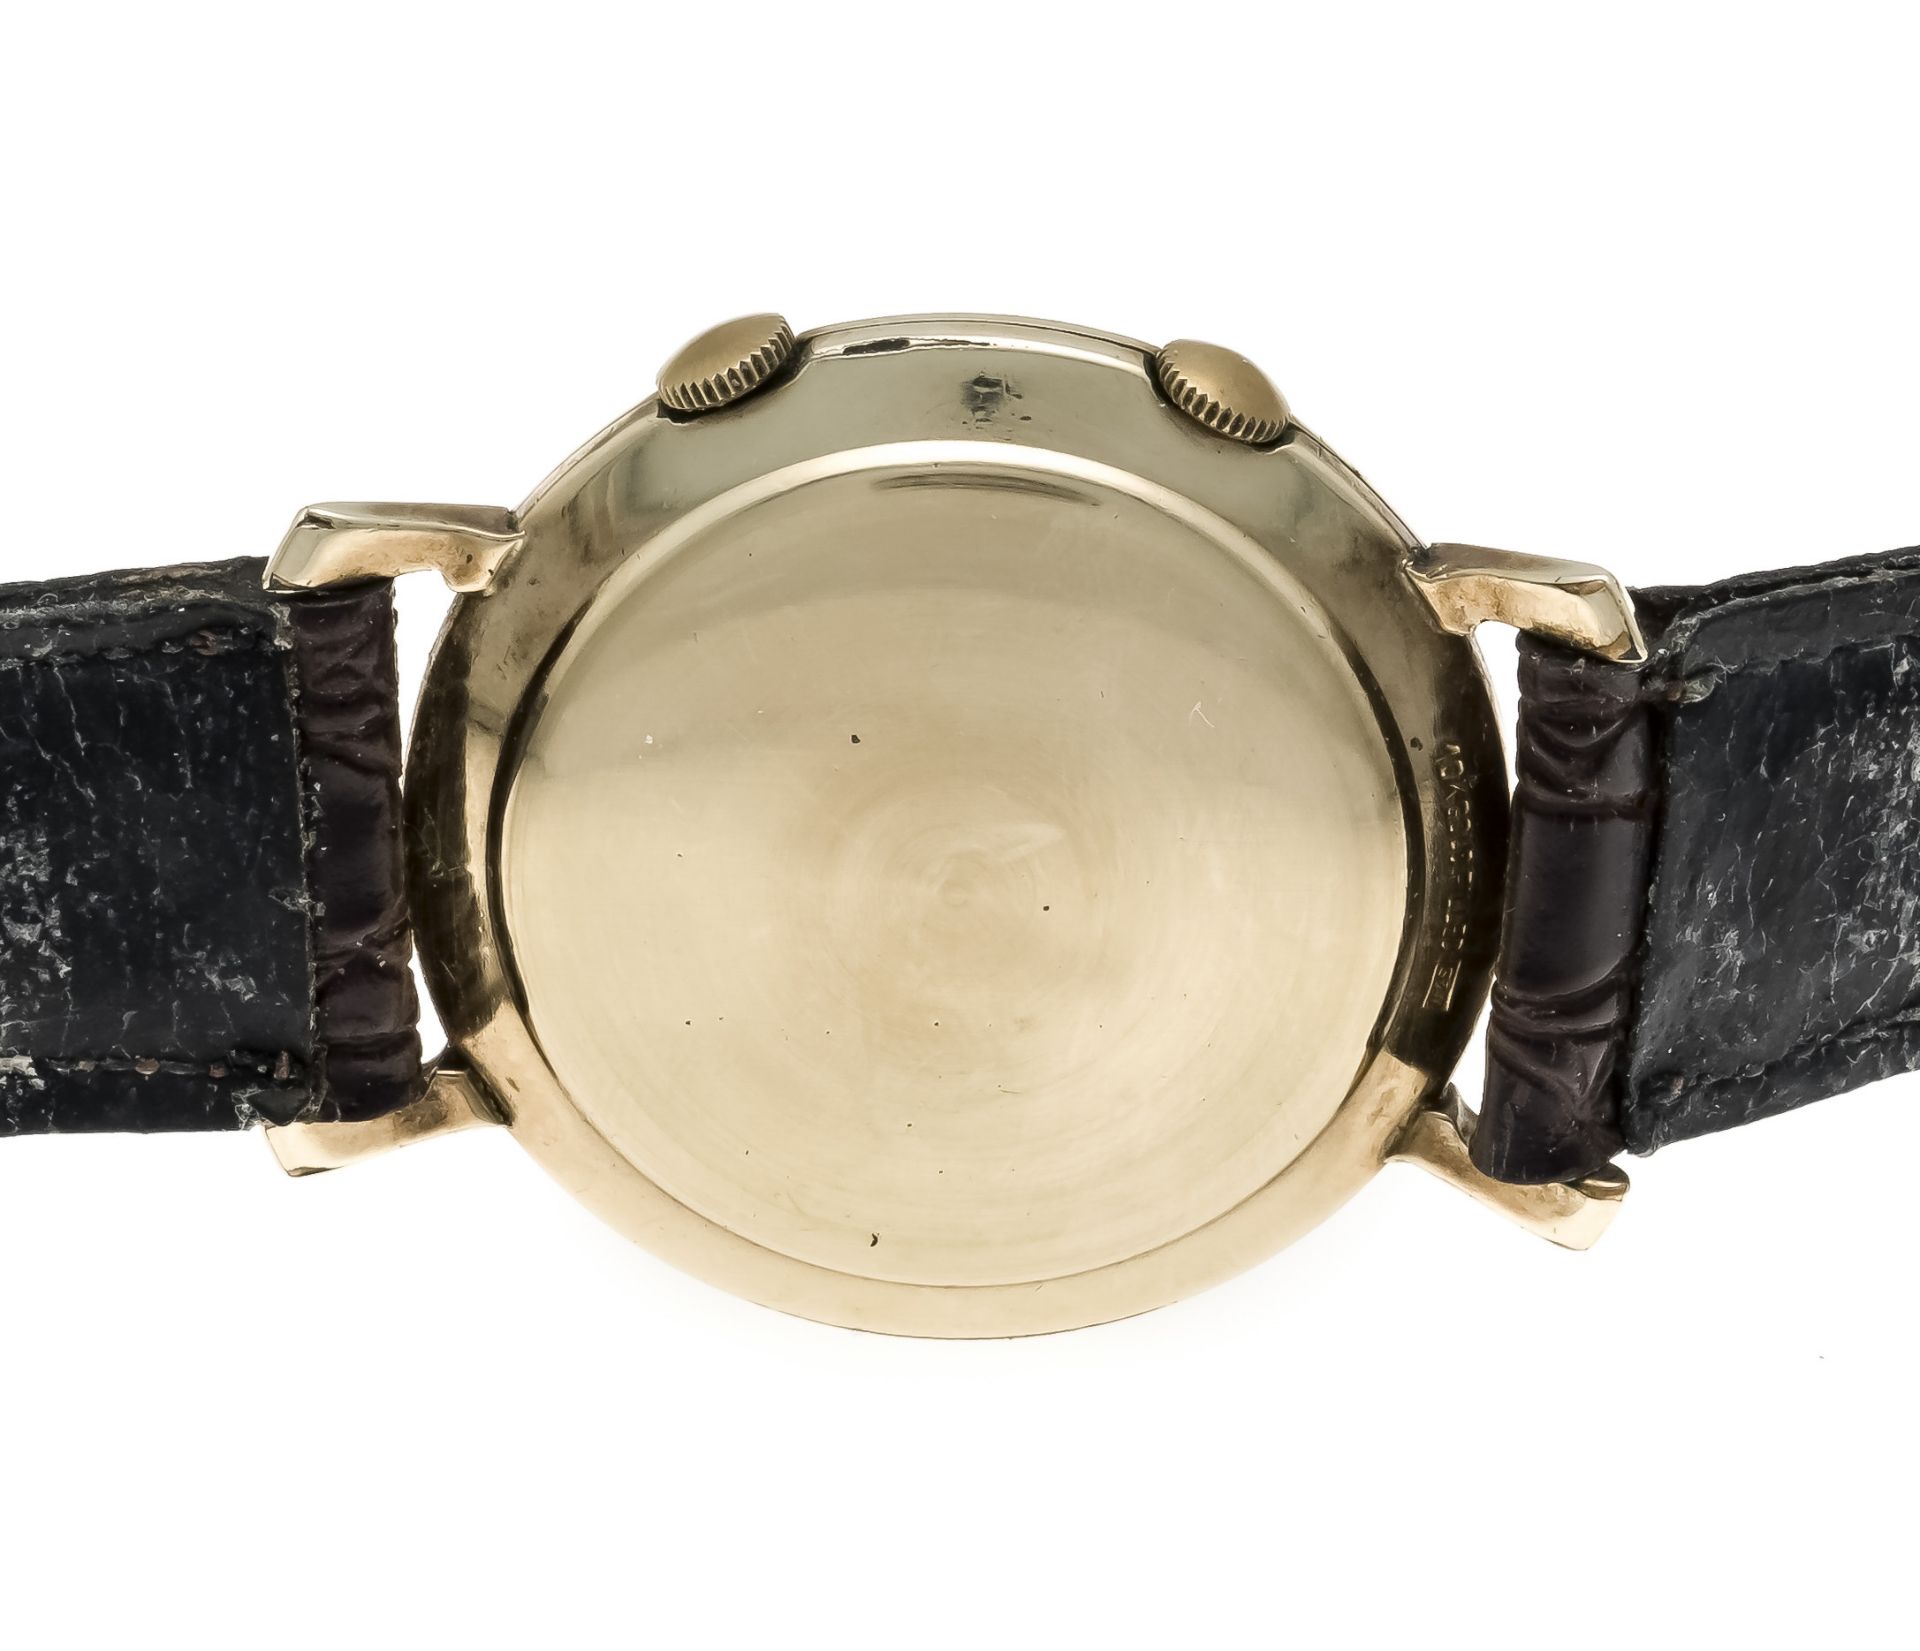 LeCoultre Memovox Alarm men's watch, rare !!! Henry Ford version, circa 1955, 10ct. GoldFilled, - Image 2 of 2